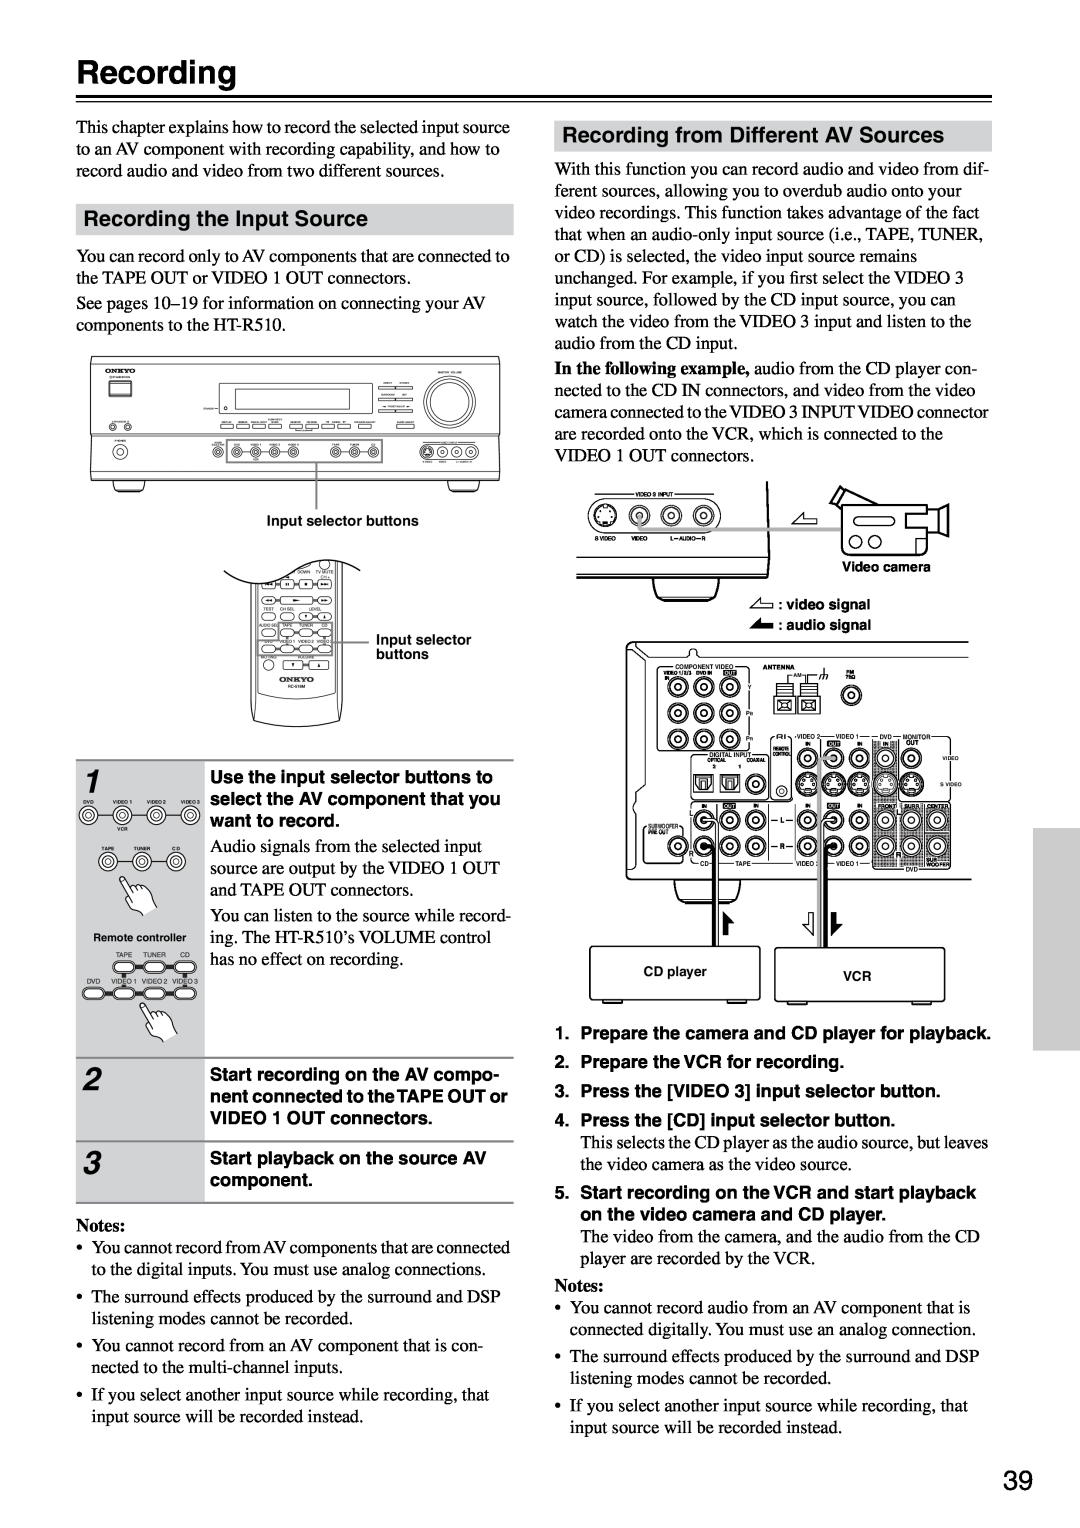 Onkyo HT-R510 instruction manual Recording the Input Source, Recording from Different AV Sources 